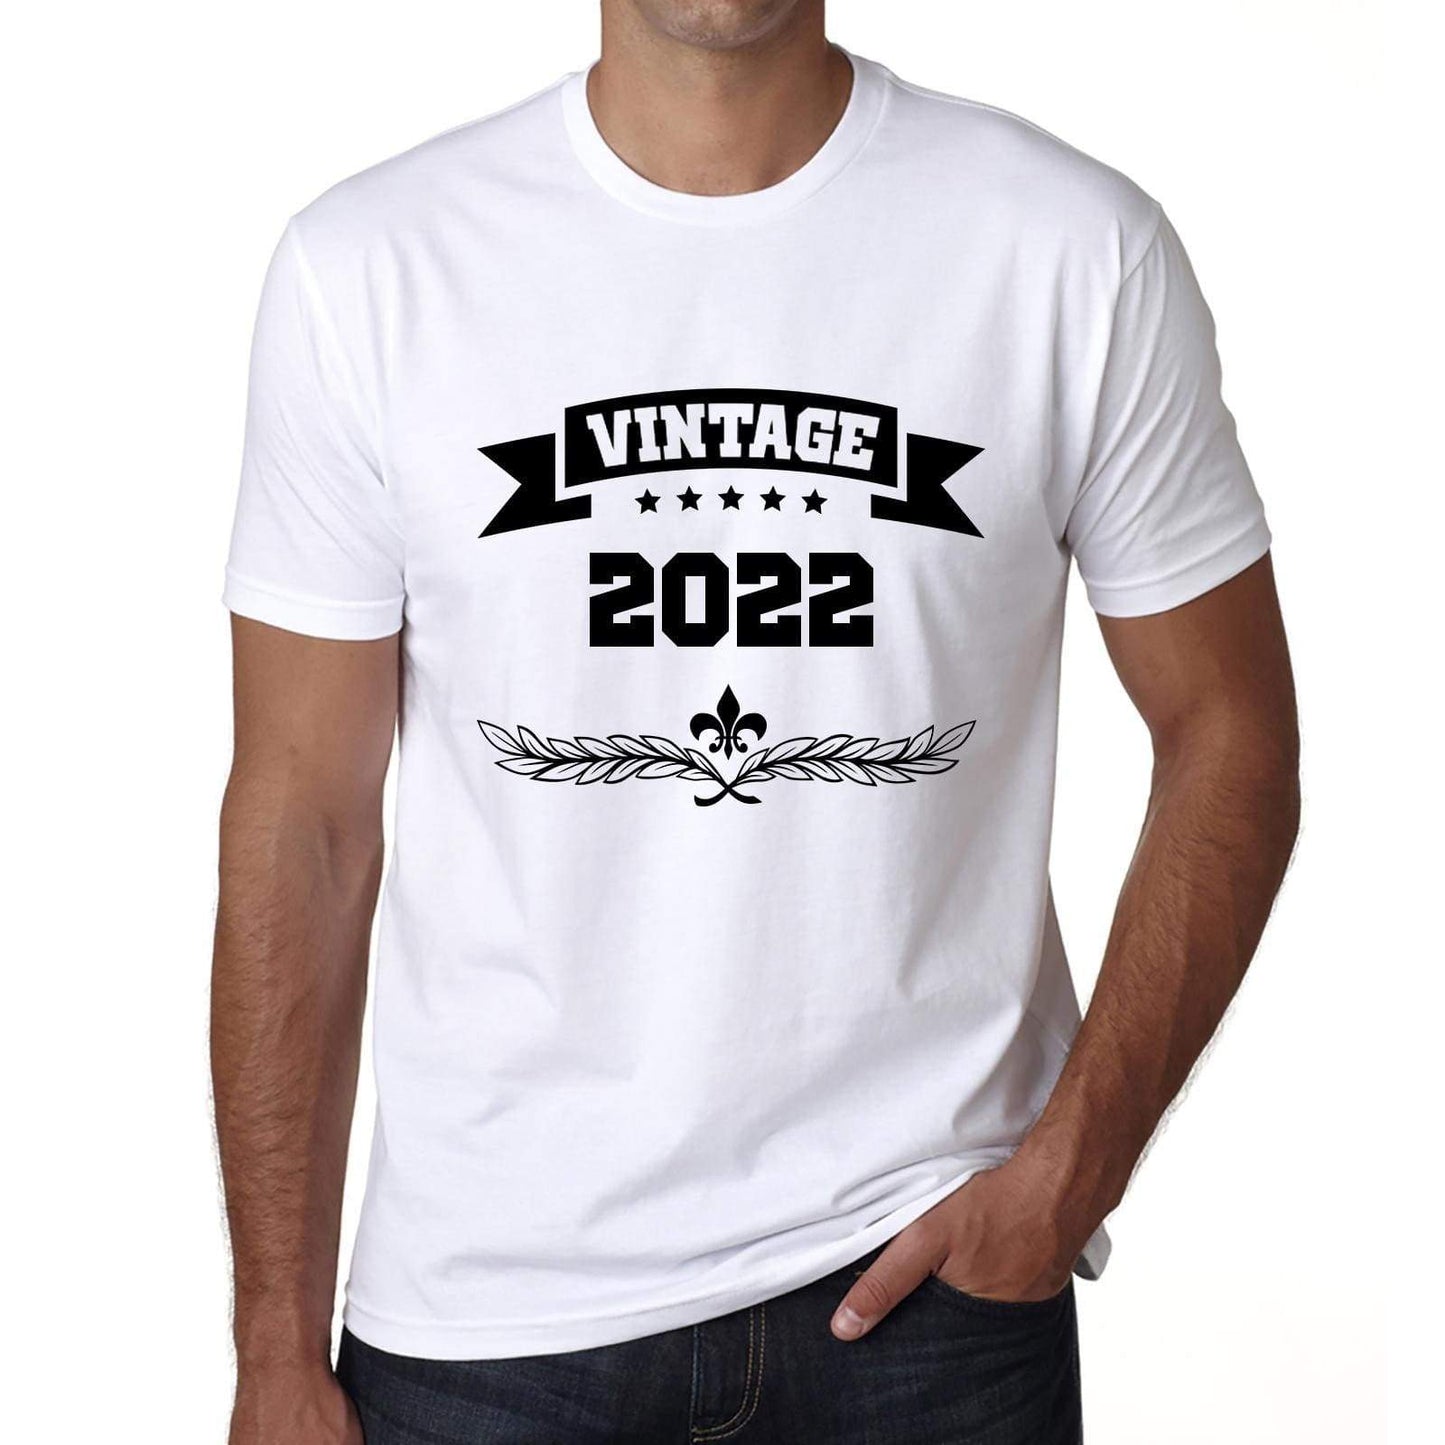 2022 Vintage Year White Mens Short Sleeve Round Neck T-Shirt 00096 - White / S - Casual